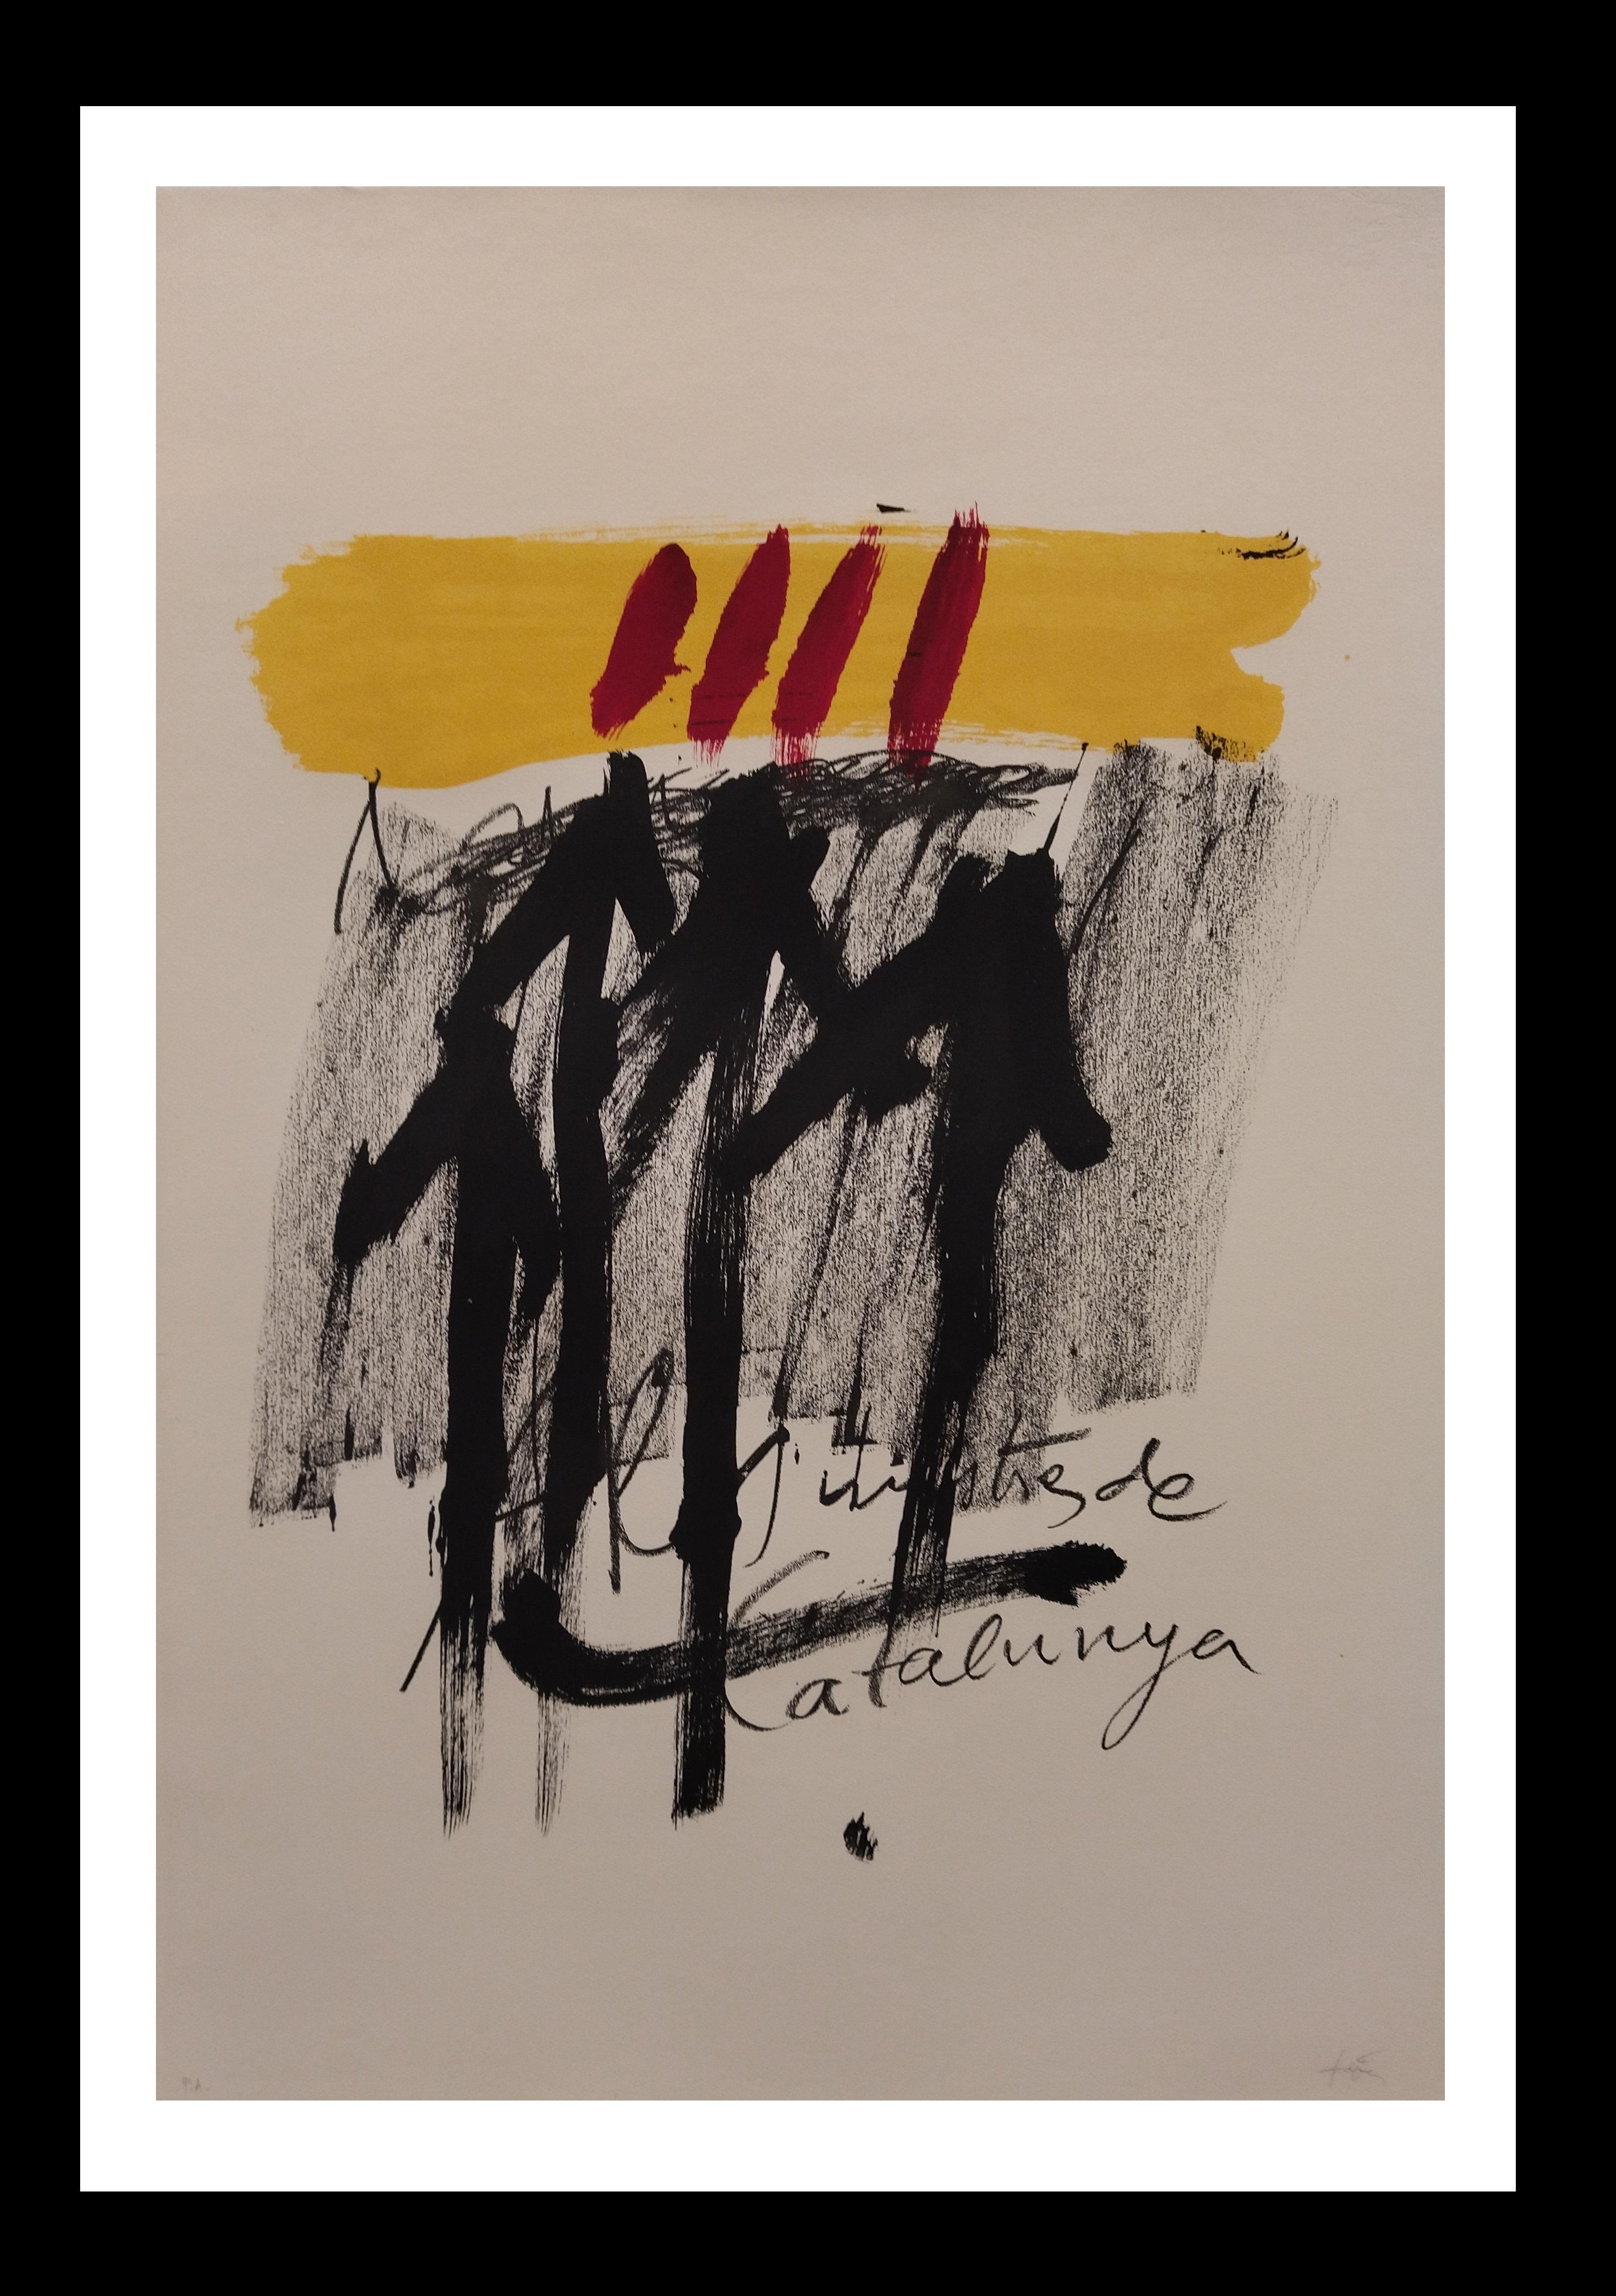  Tapies  Black  Red  Yellow  Vertical  original lithograph painting - Print by Antoni Tàpies